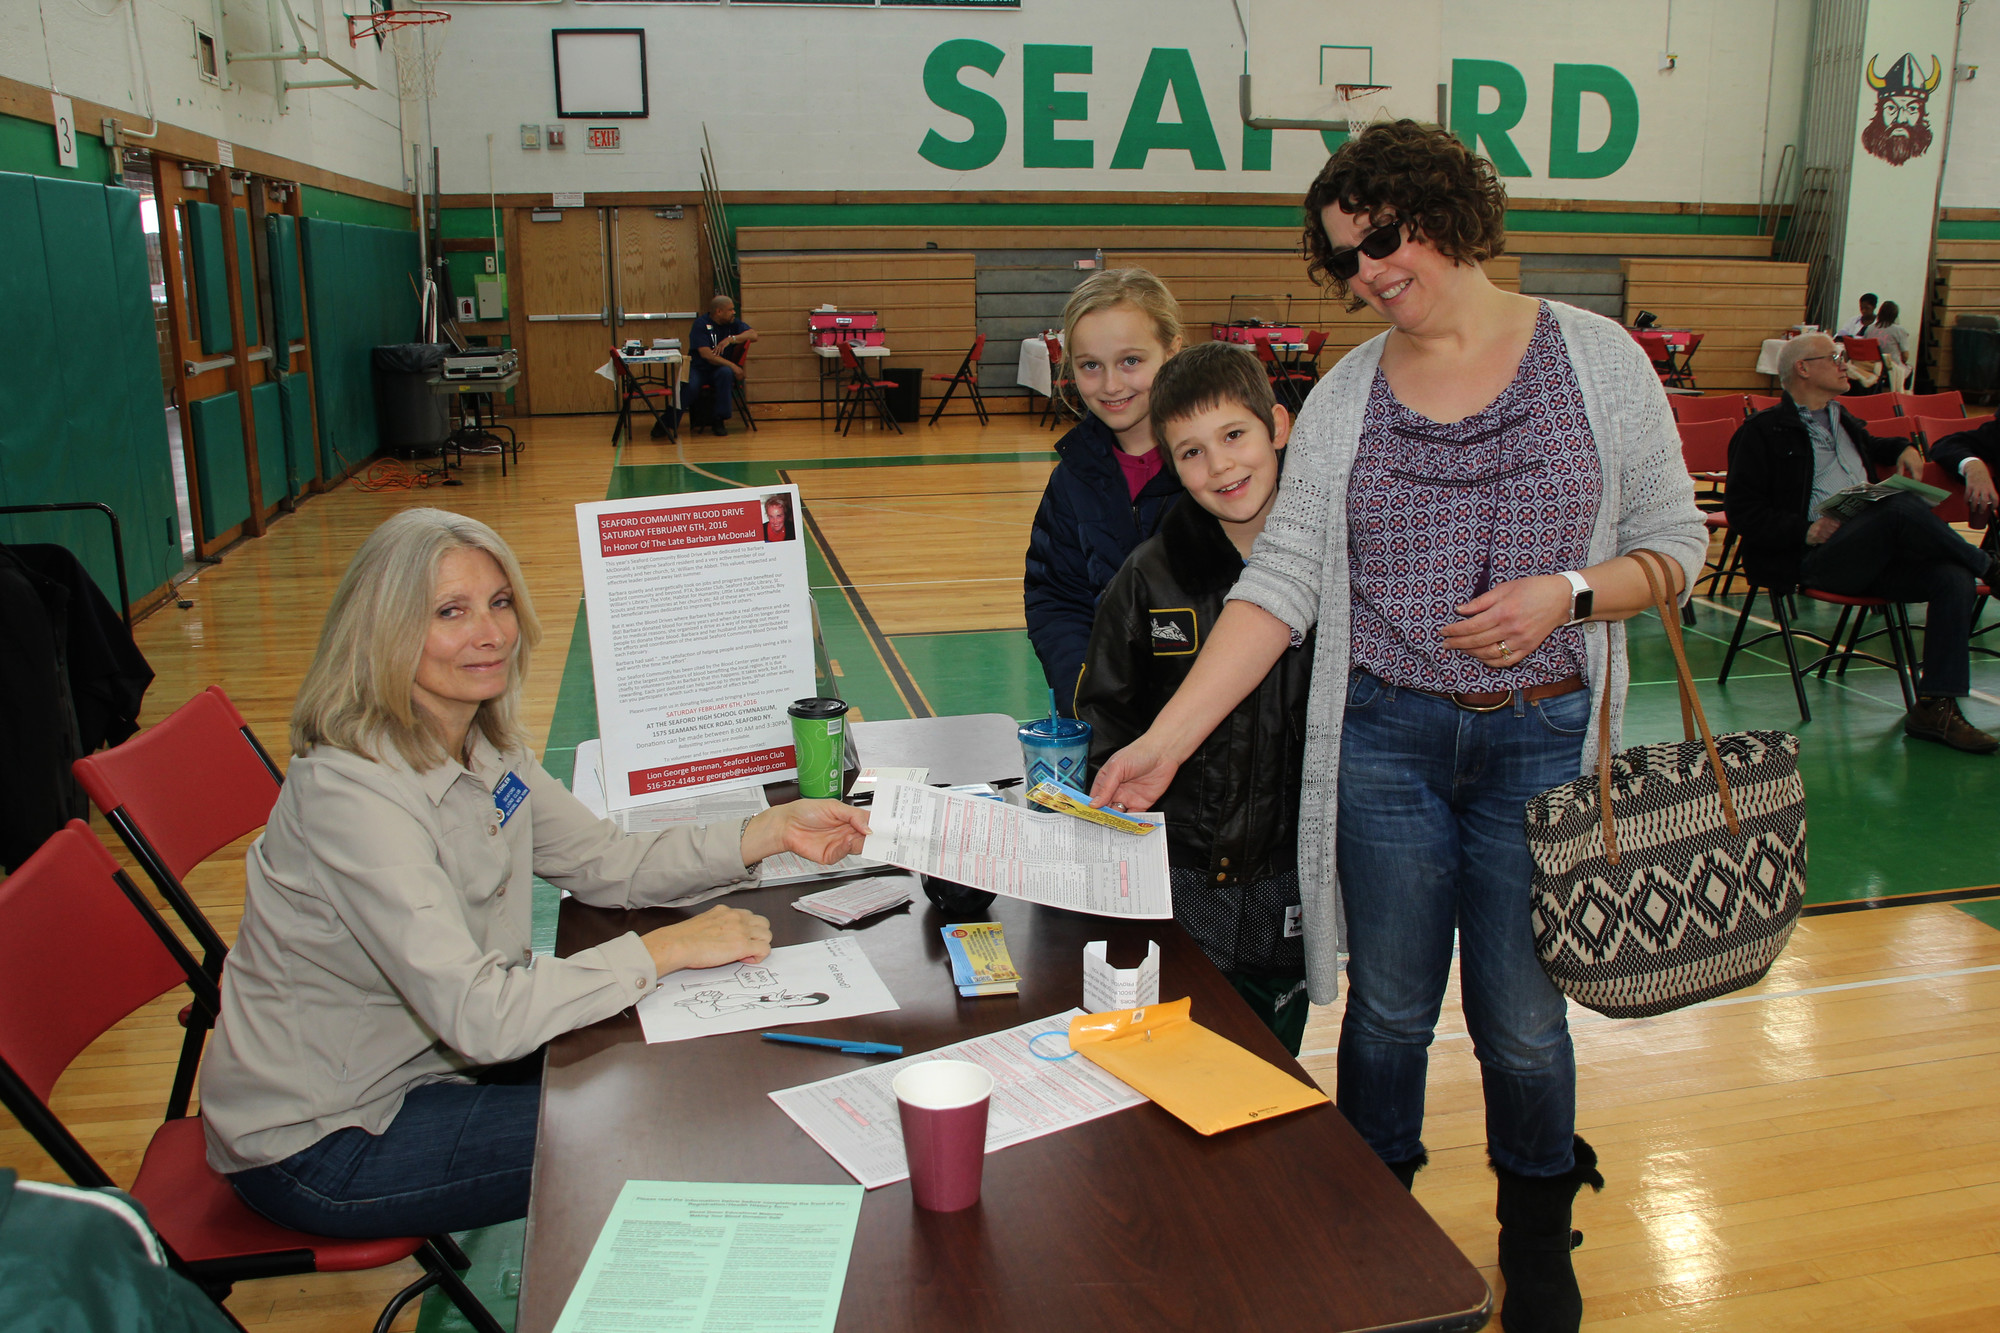 Blood Drive Volunteer Nancy Kohler handed a donor application to Jean Schaefer, who was joined by her children, Faith and James, at Seaford High School last Saturday morning.